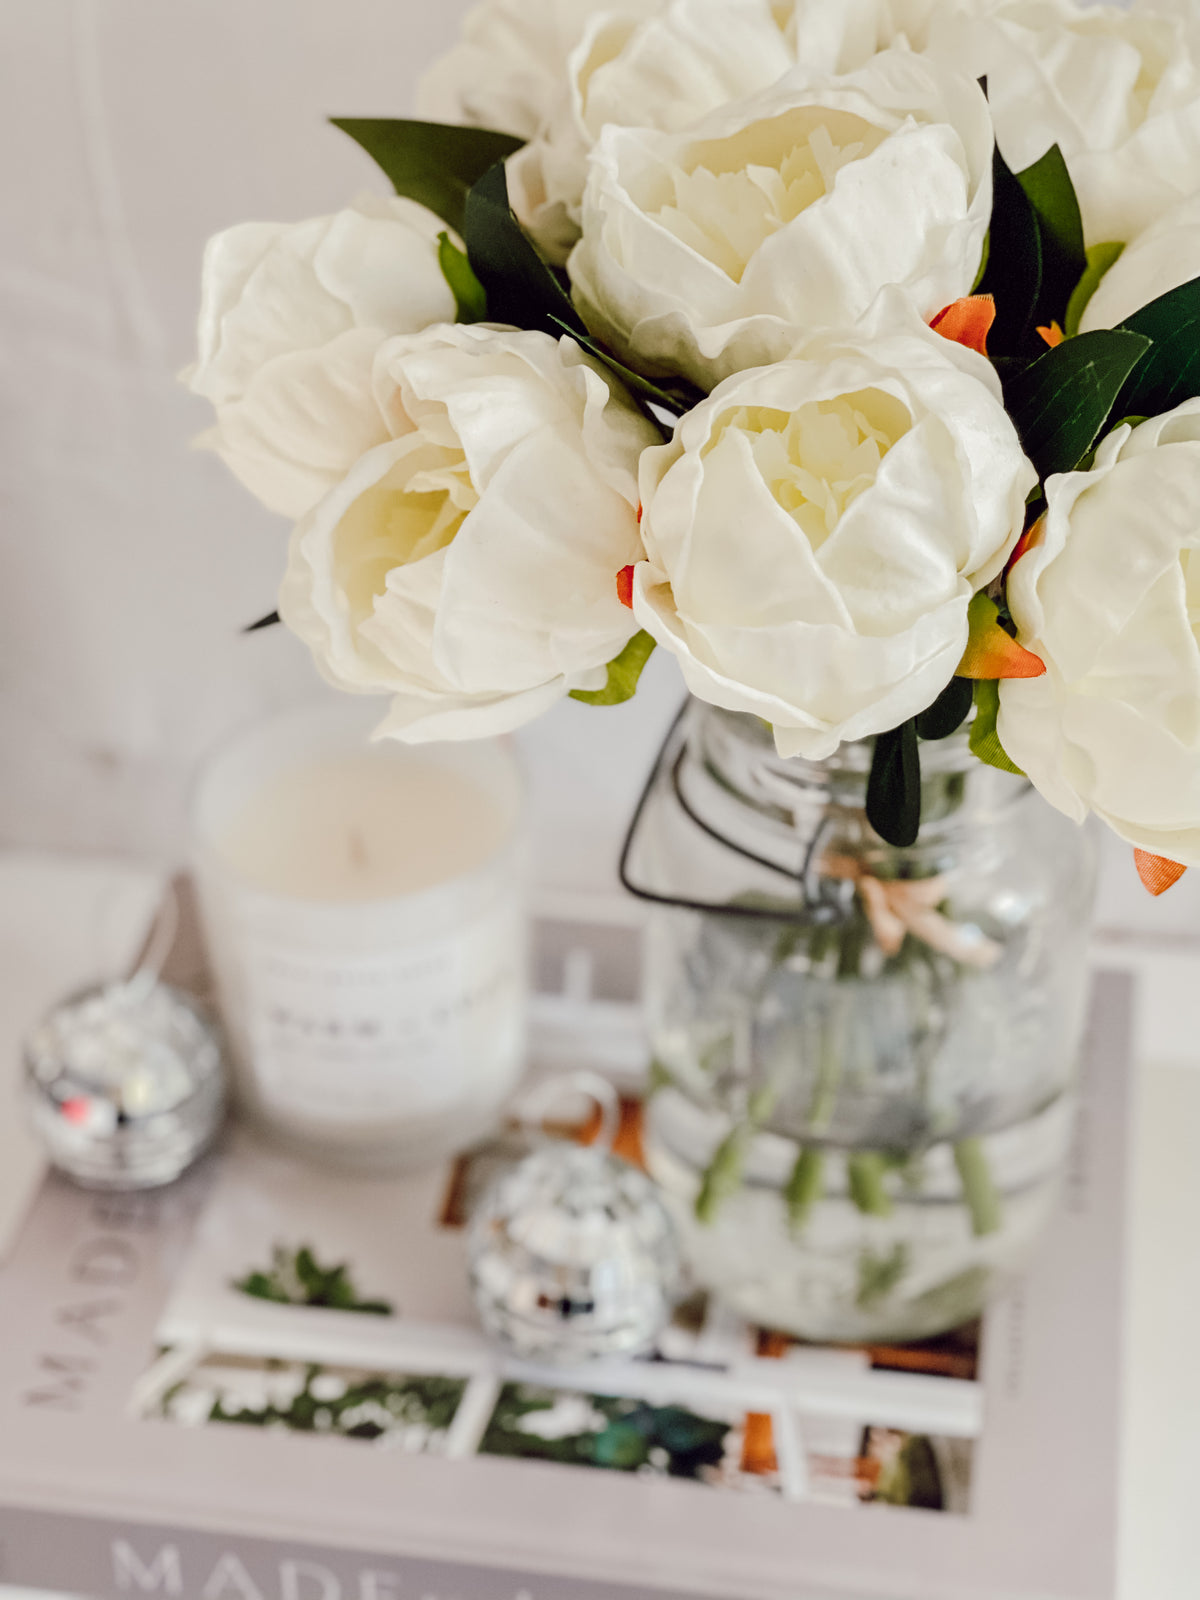 BEST SELLER: 12 Inch White Real Touch Peony Bundle (6 Stems)